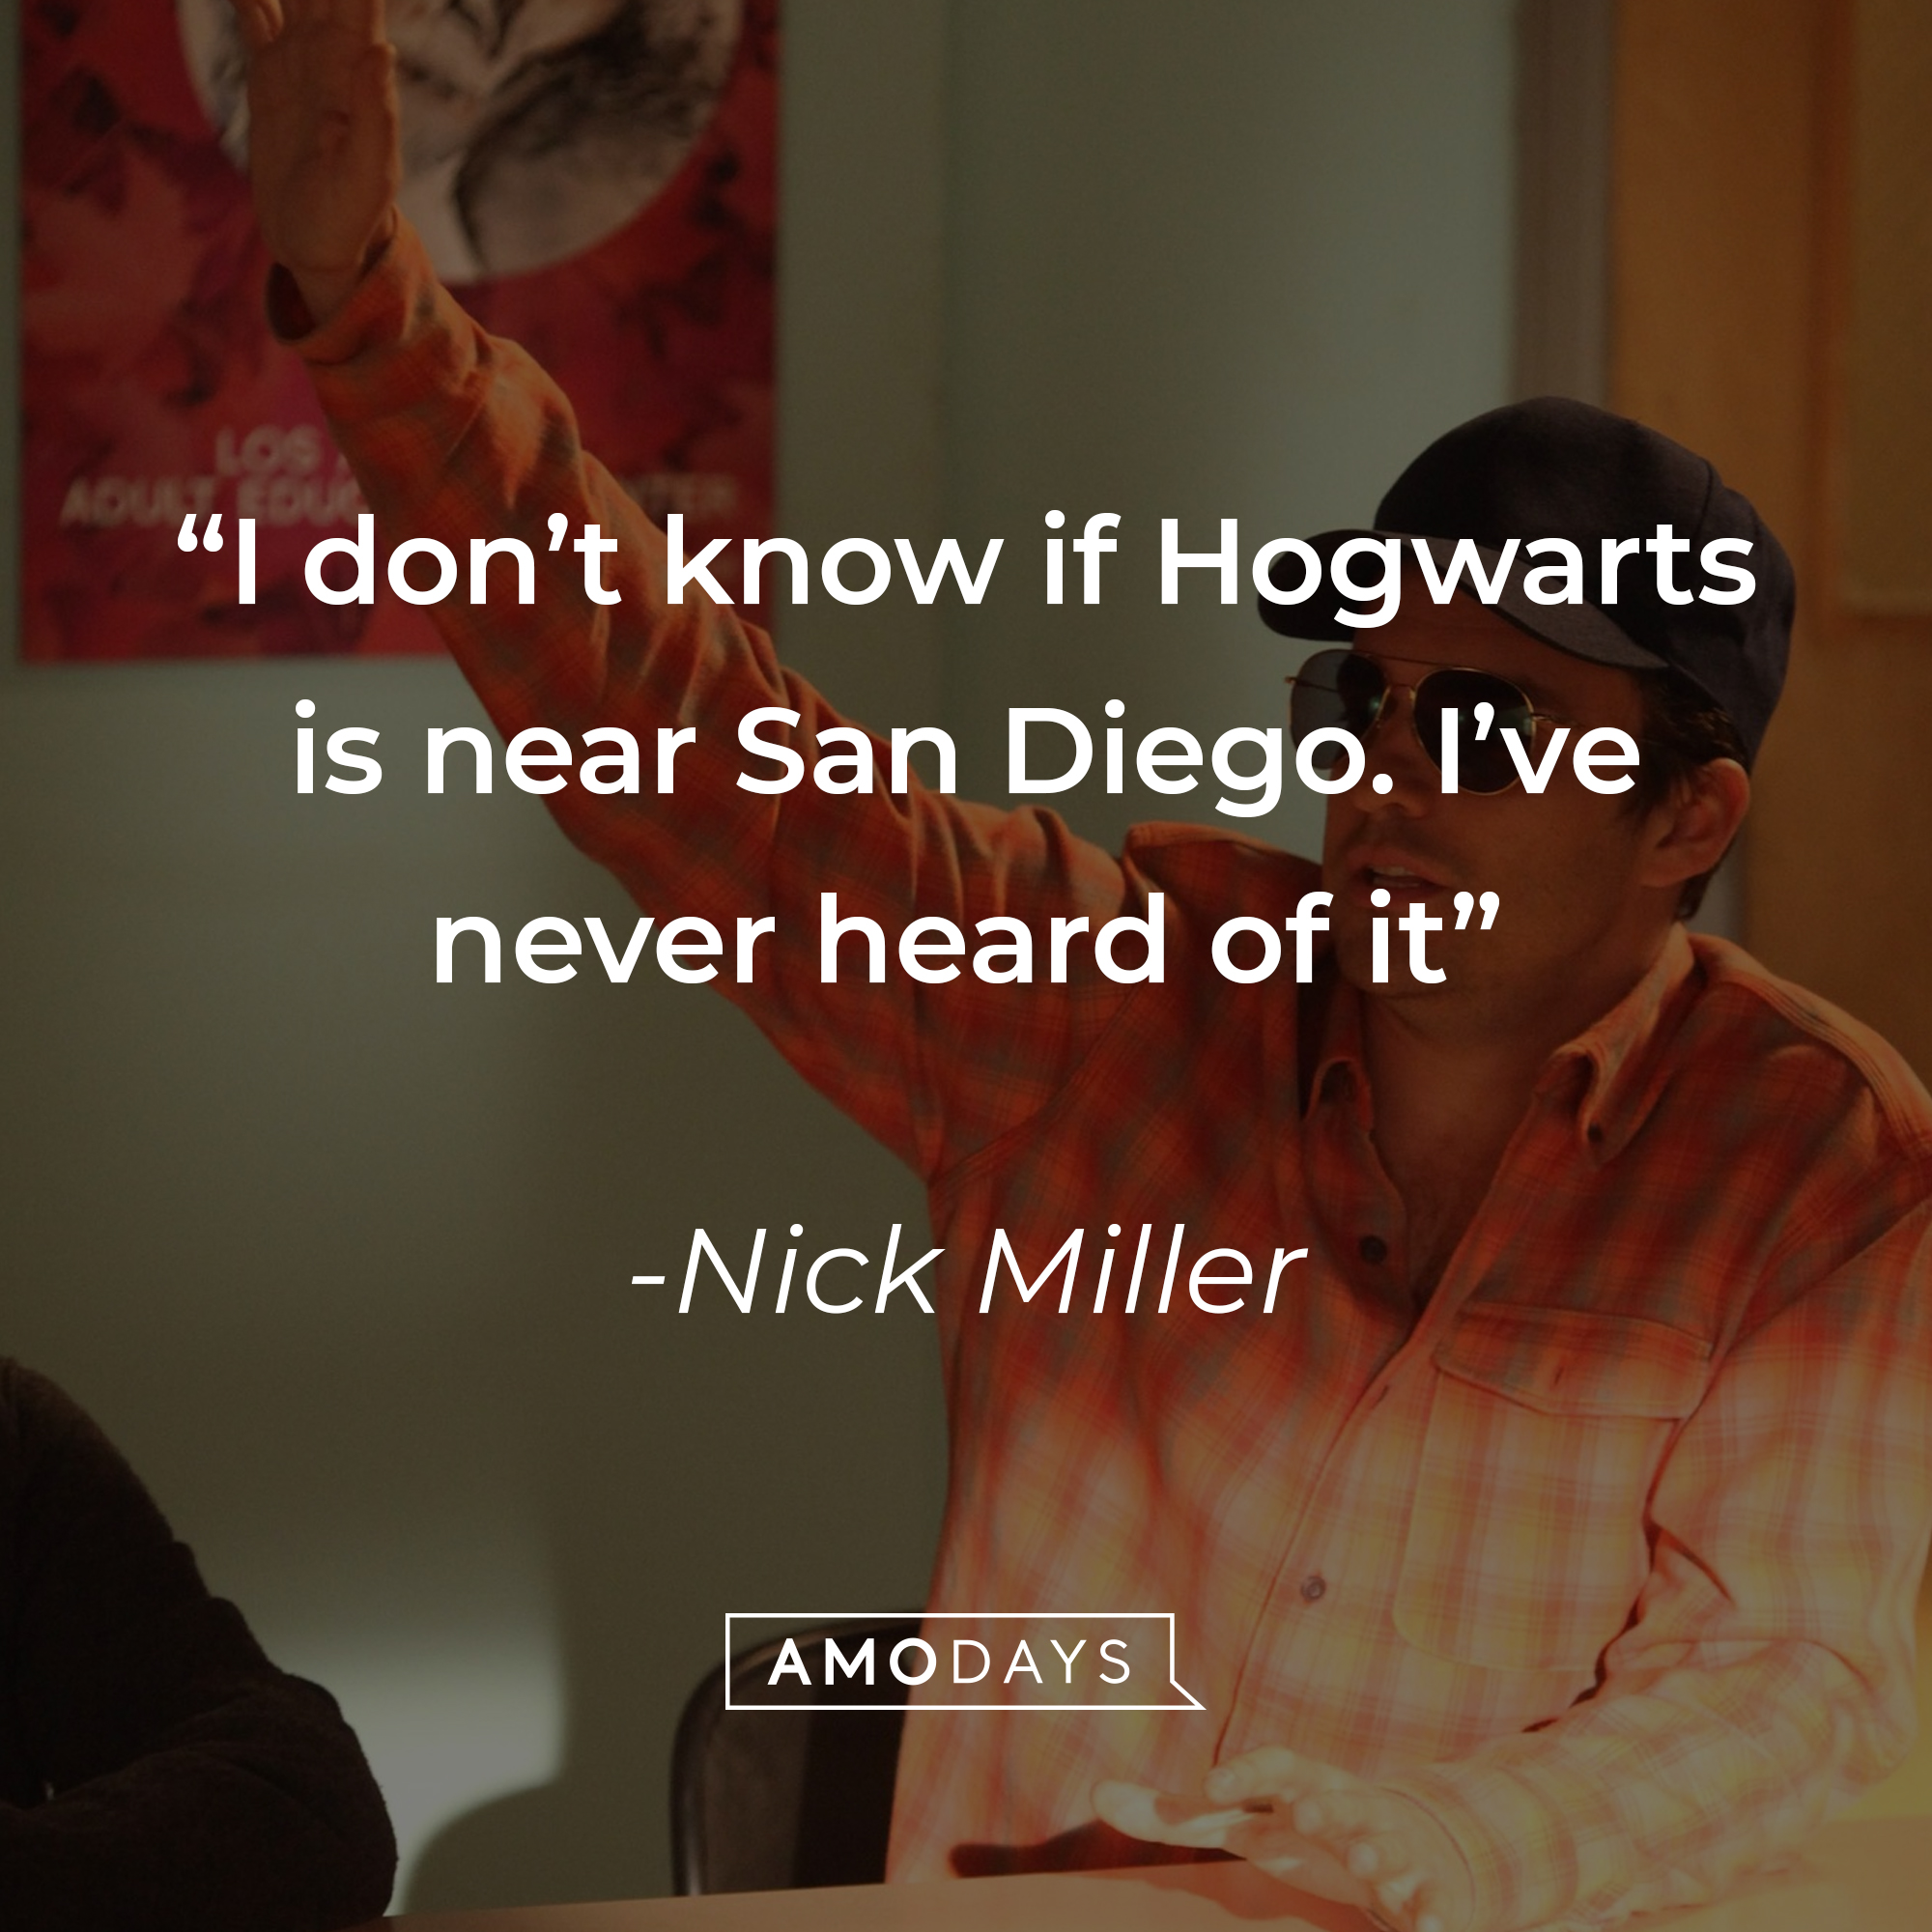 Nick Miller, with his quote: “I don’t know if Hogwarts is near San Diego. I’ve never heard of it.” | Source: facebook.com/OfficialNewGirl